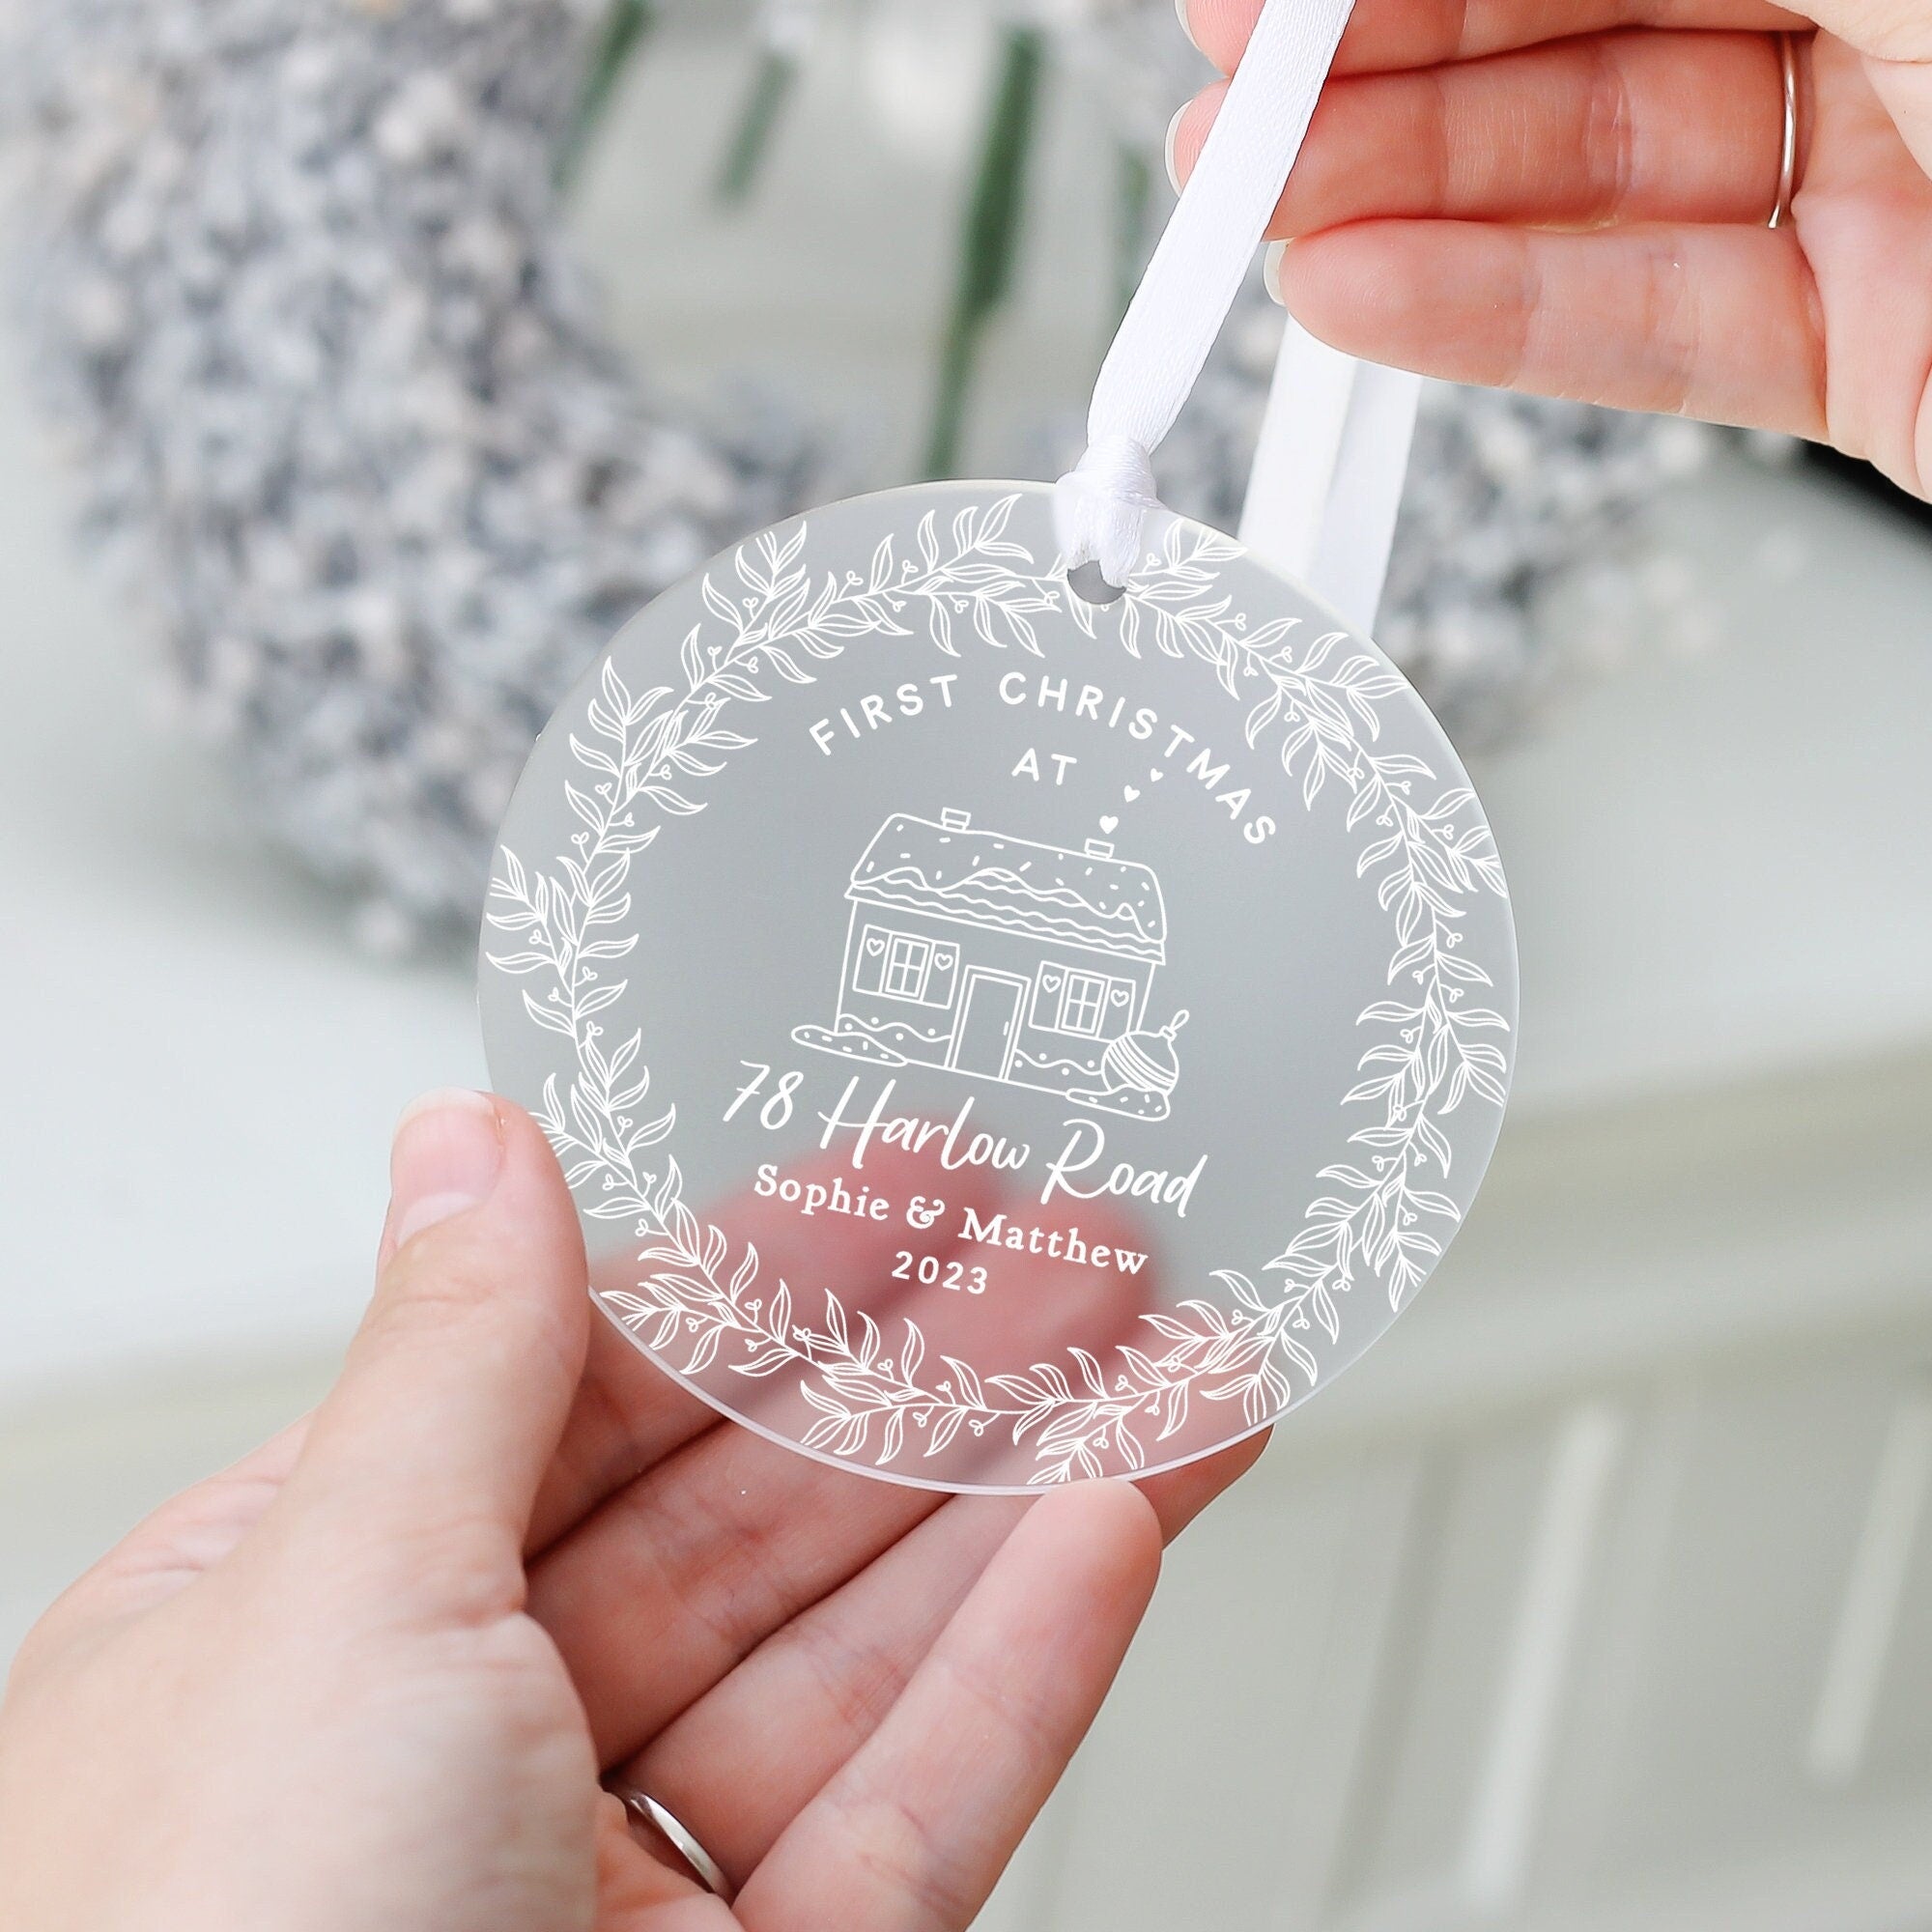 Personalised First Christmas in New Home Gift Frosted Acrylic